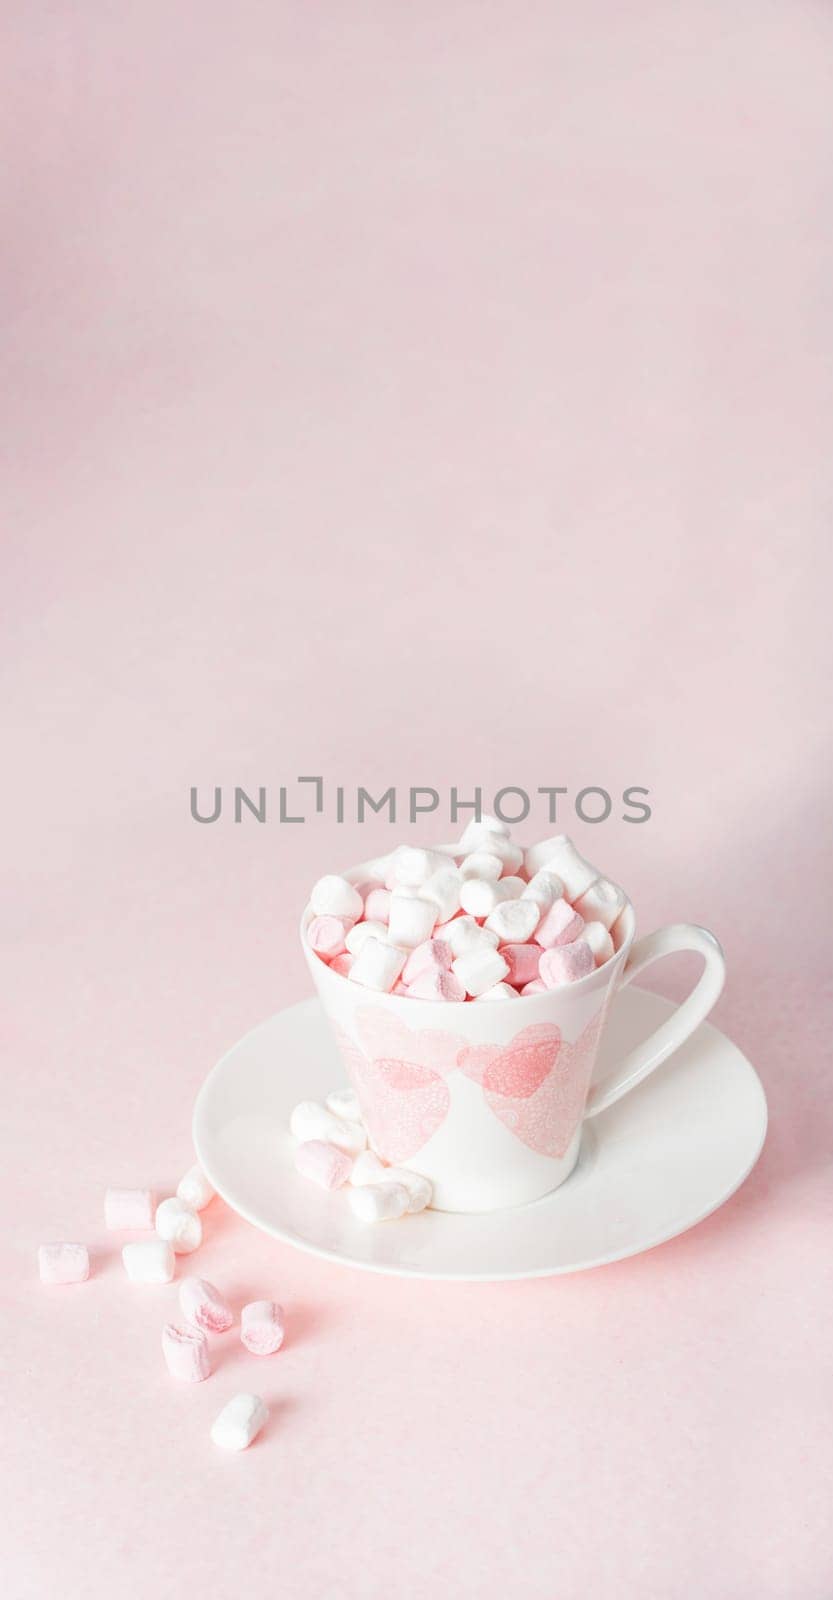 pastel peach still life with mini marshmallows in porcelain cup with pink hearts, gift for Mother's Day,Valentine's Day by KaterinaDalemans